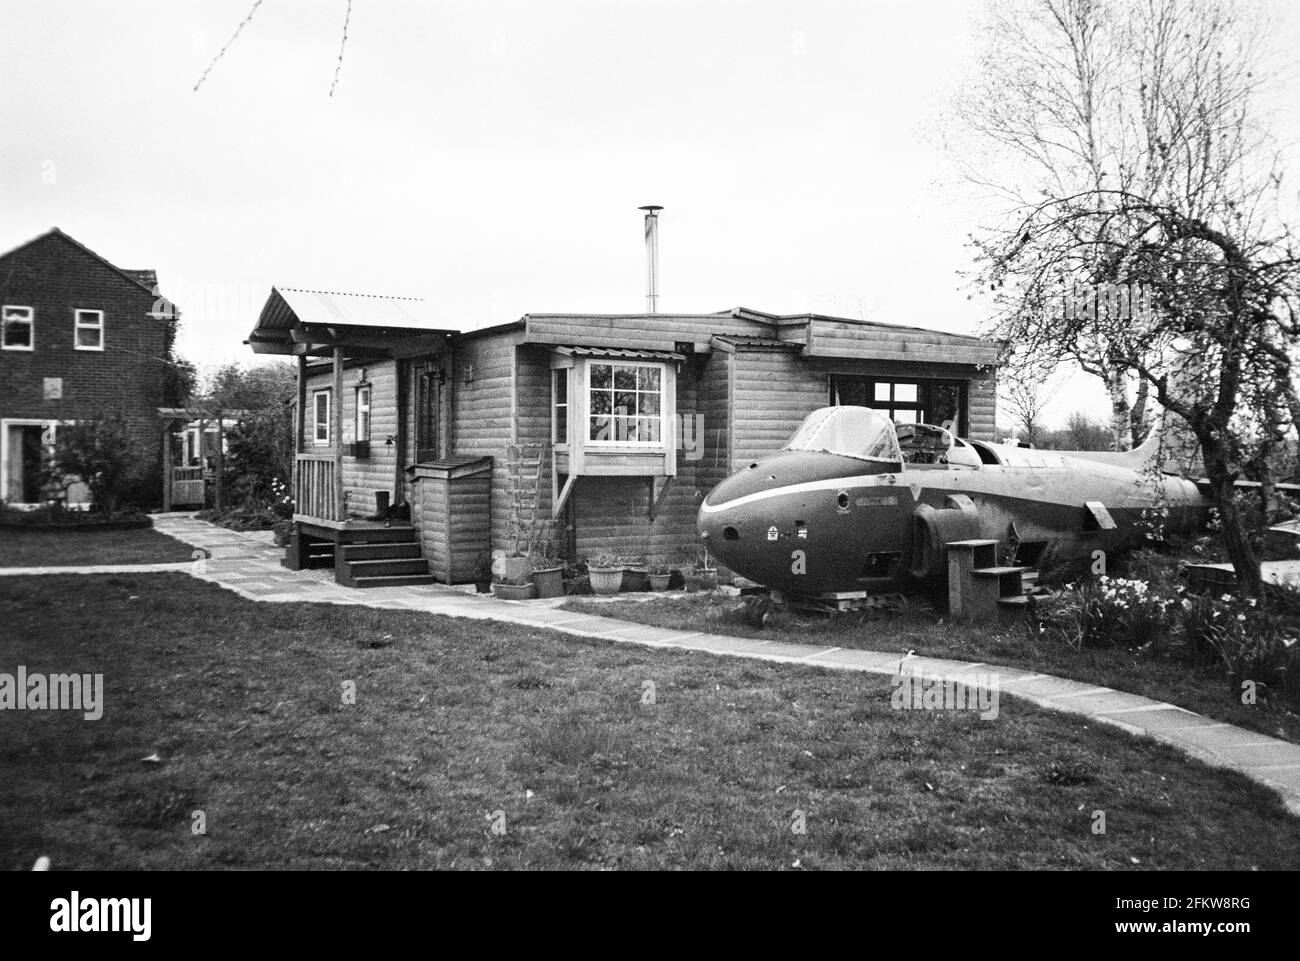 Jet Trainer aircraft and Log cabin style twin static caravan, Medstead, Hampshire, England, United Kingdom. Stock Photo